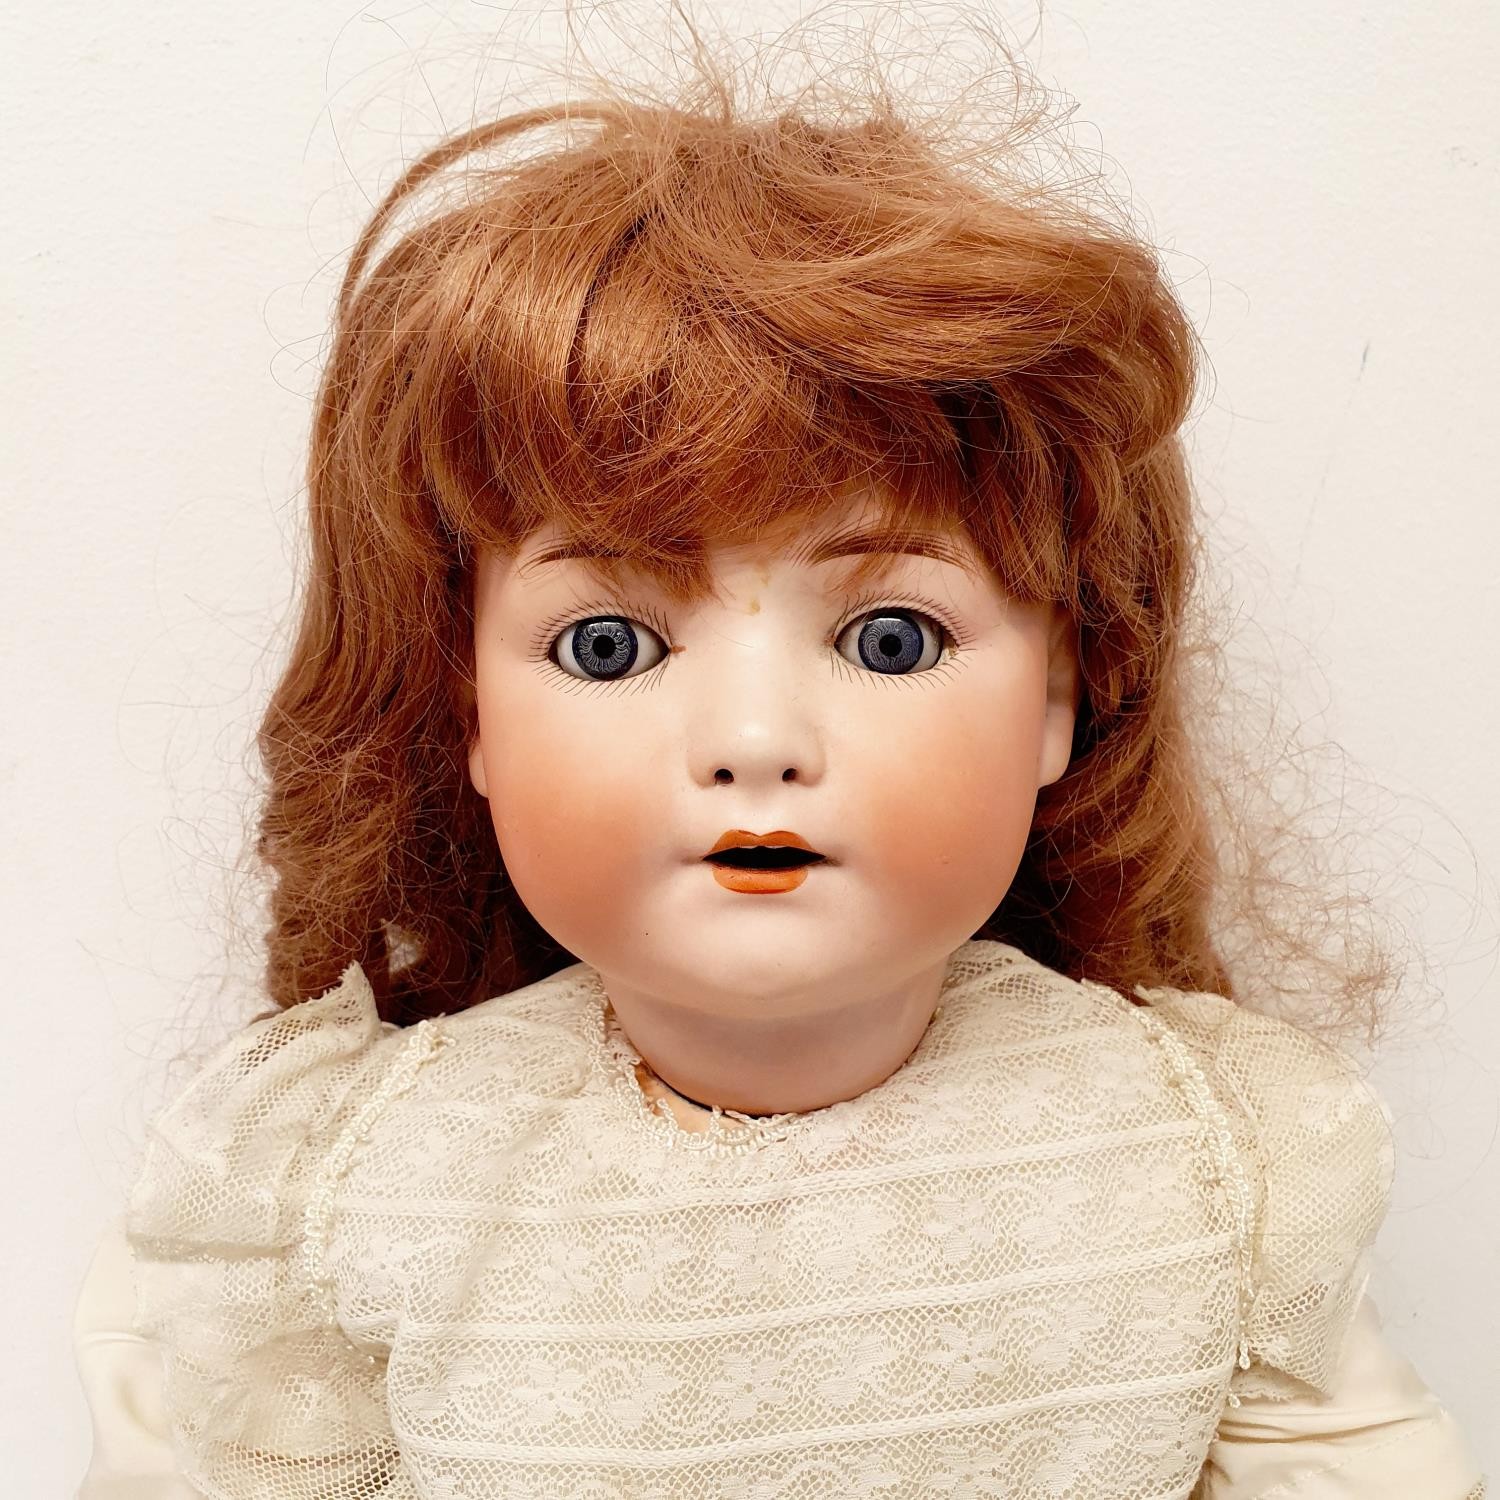 A Heubach German bisque headed doll, with a composite body, and millefiori glass eyes, 56 cm - Image 2 of 5